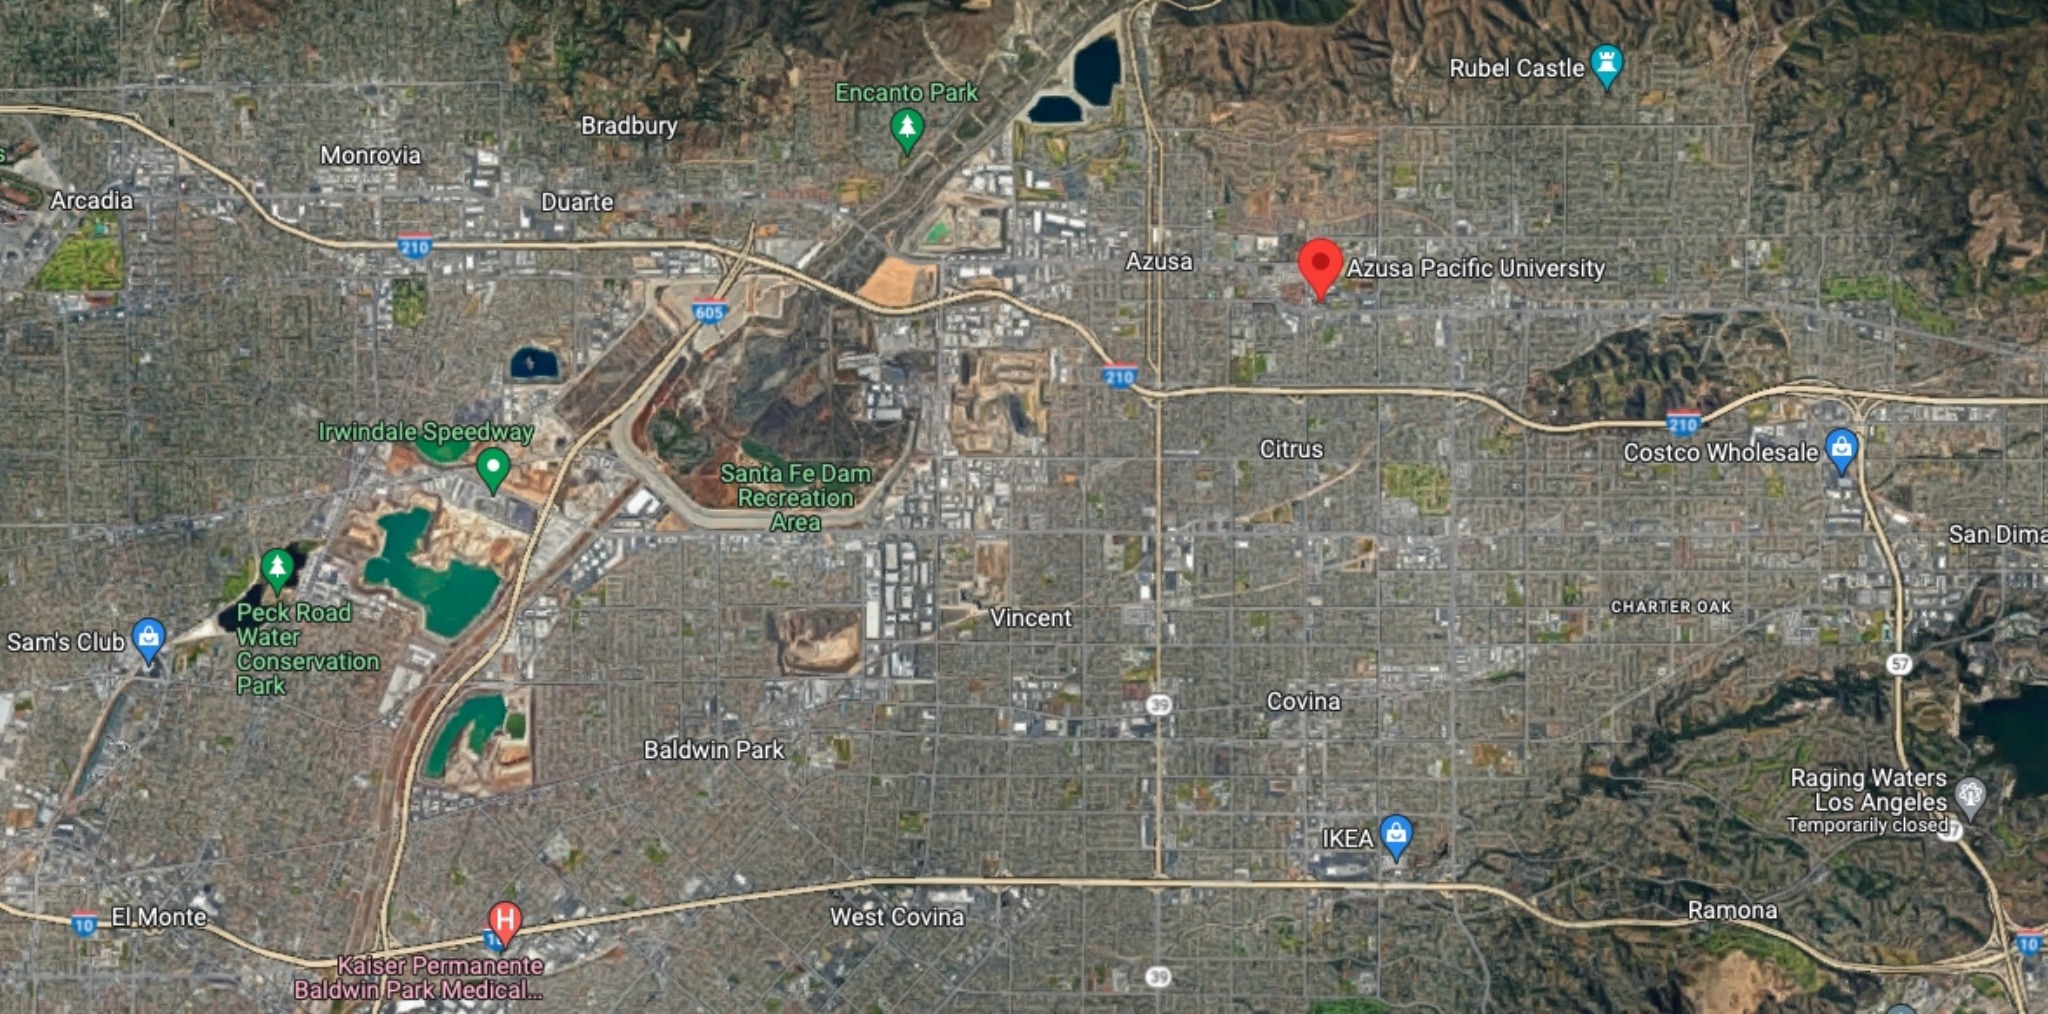 Image of Azusa Pacific's location on Google Maps